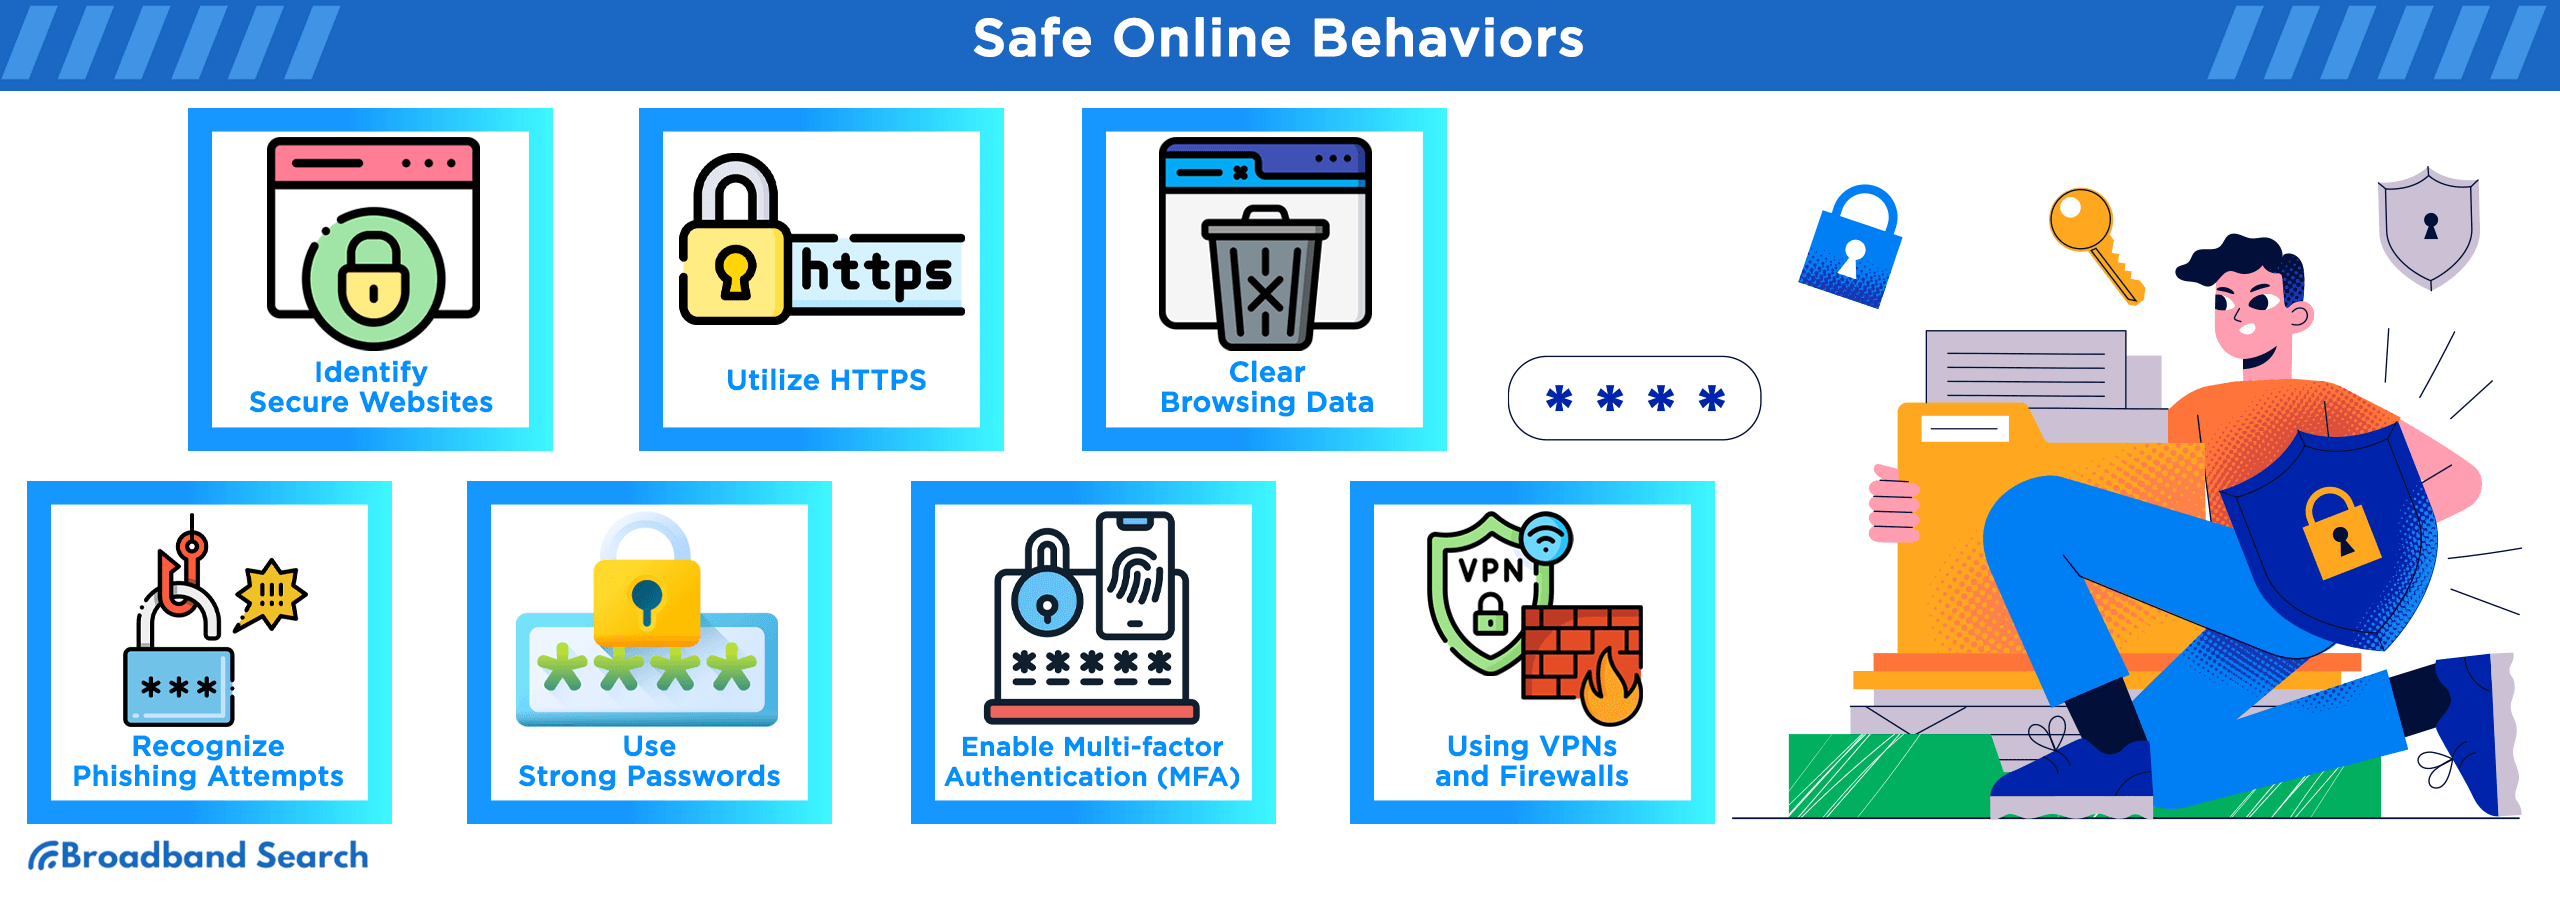 Safe online behaviors users must adhere to to keep their internet secure